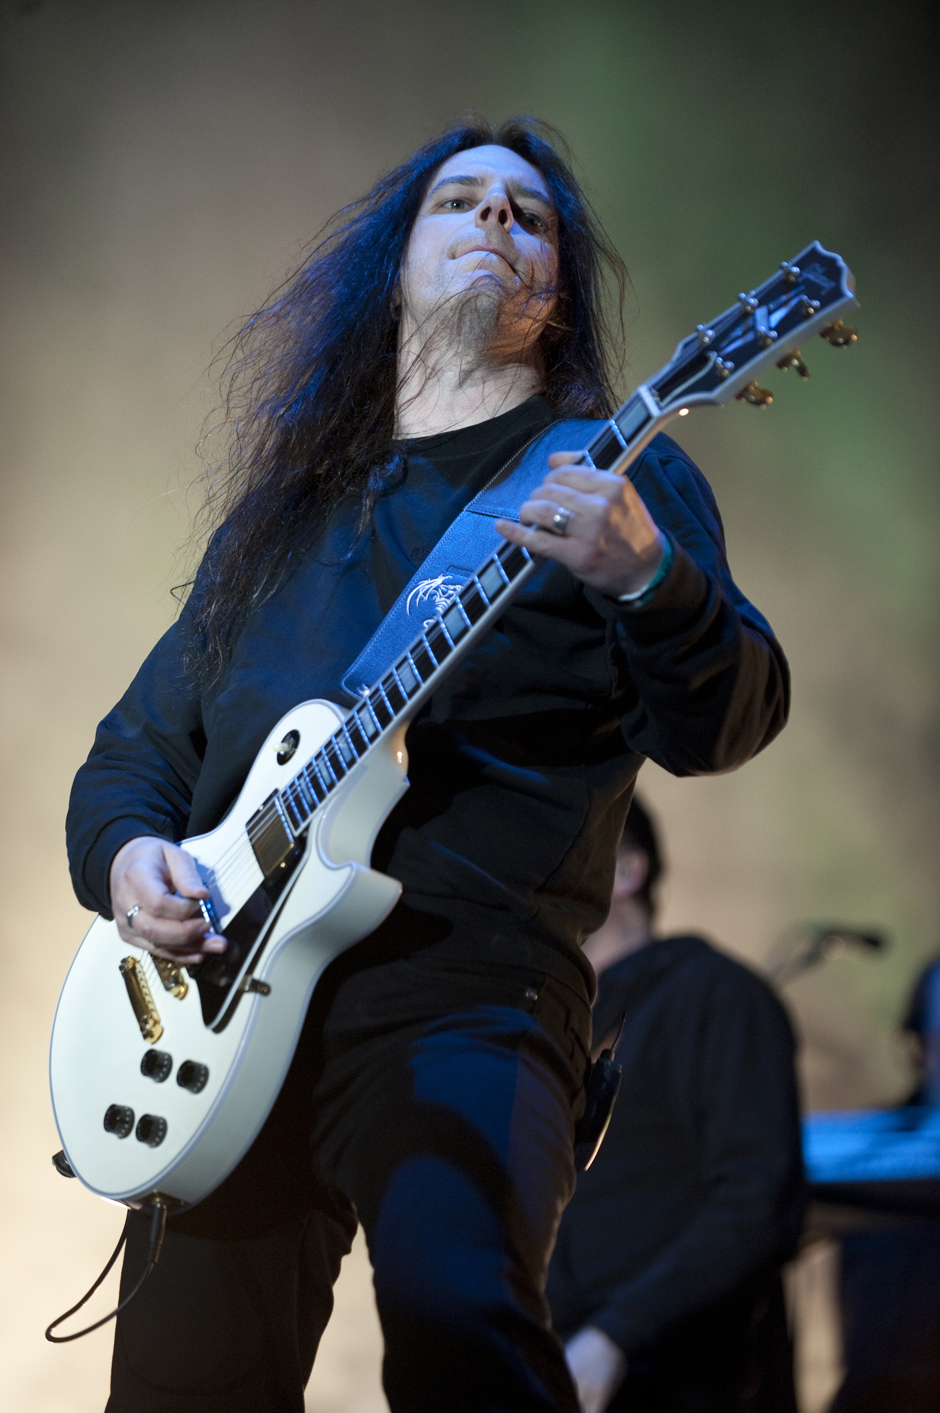 Blind Guardian live, Out & Loud Festival 2014 in Geiselwind